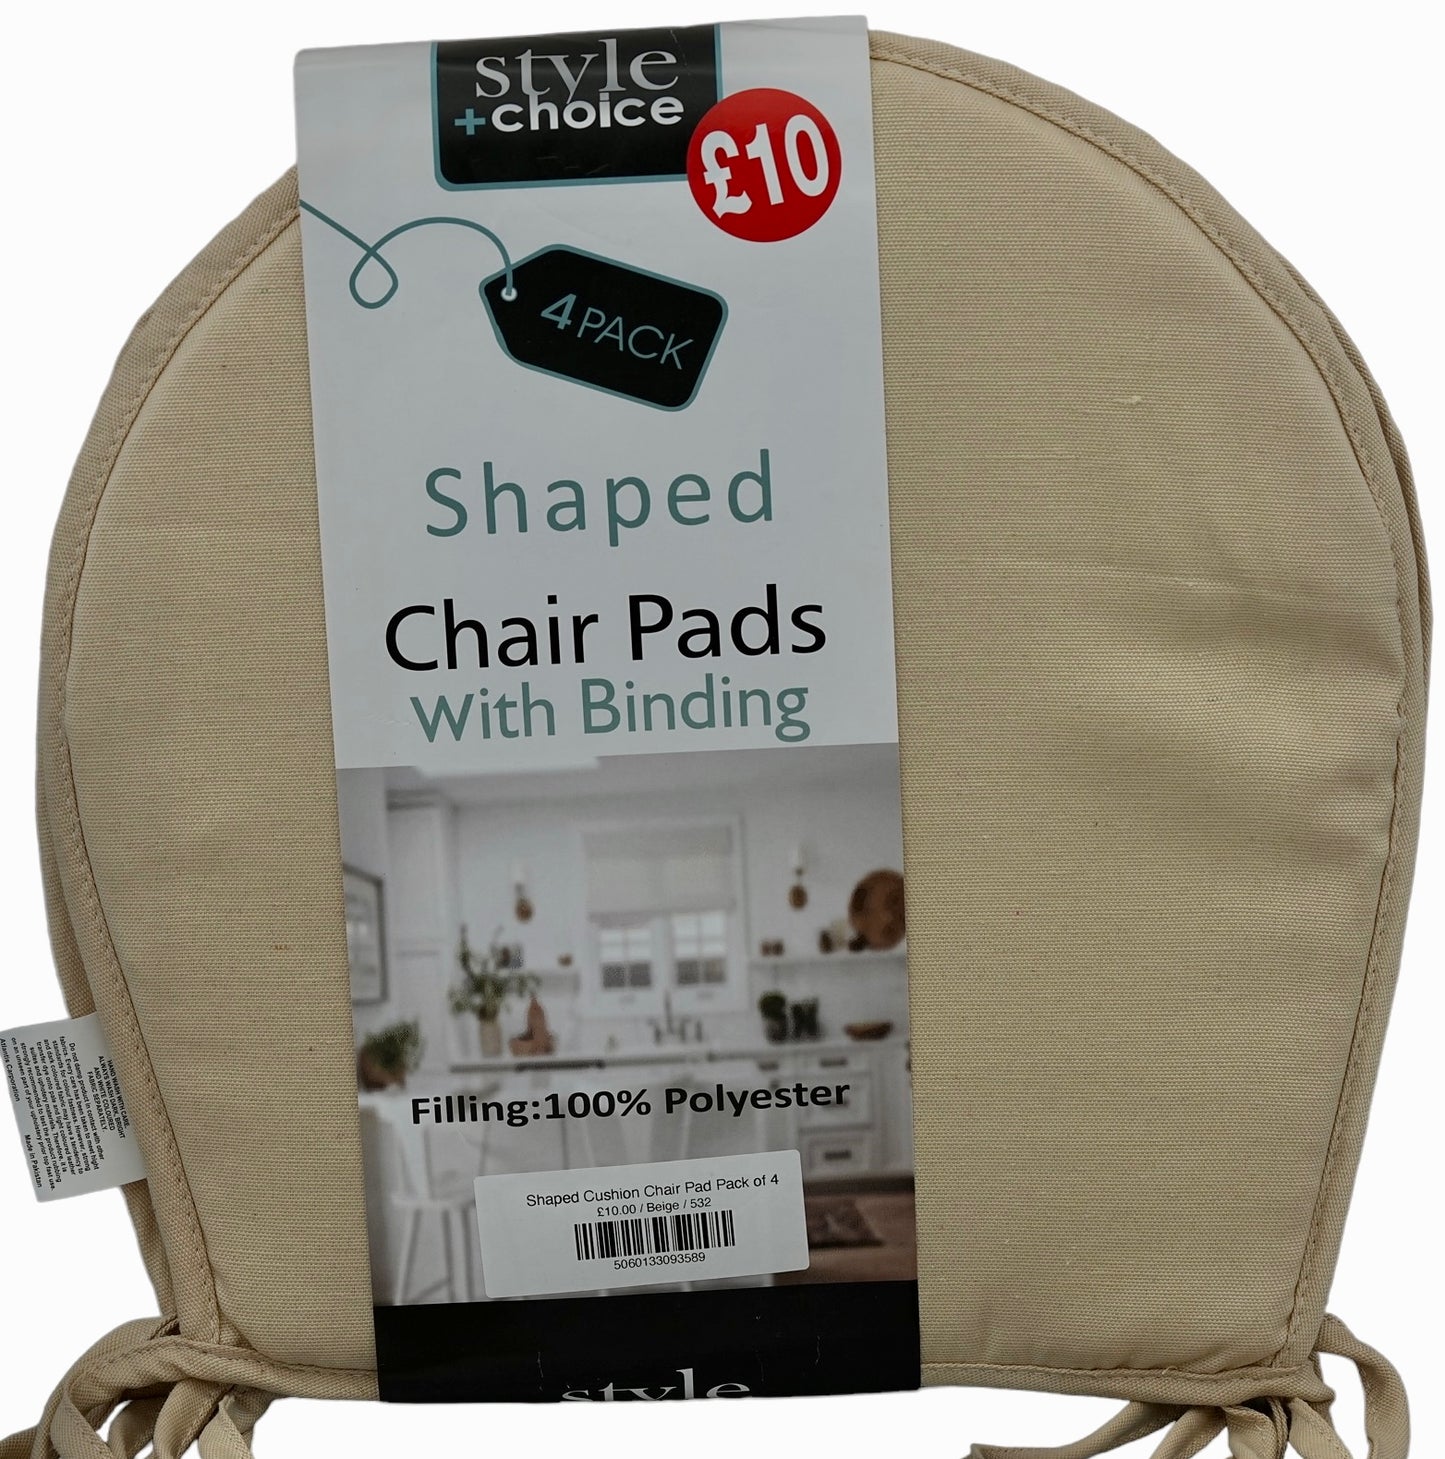 Shaped Cushion Chair Pad Pack of 4